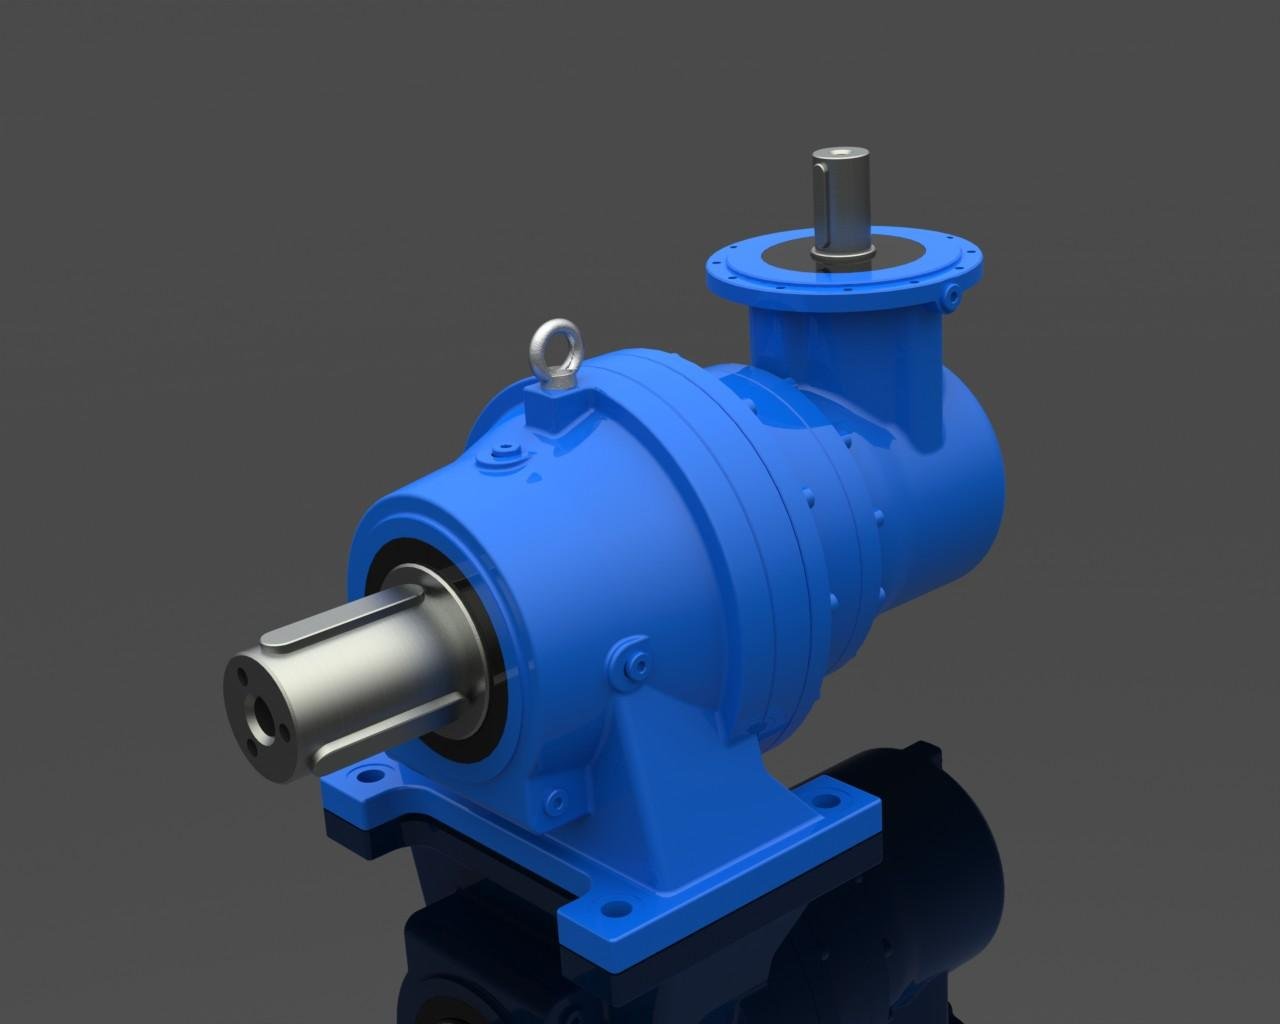 Big Power Industrial Planetary Speed Gearbox 3